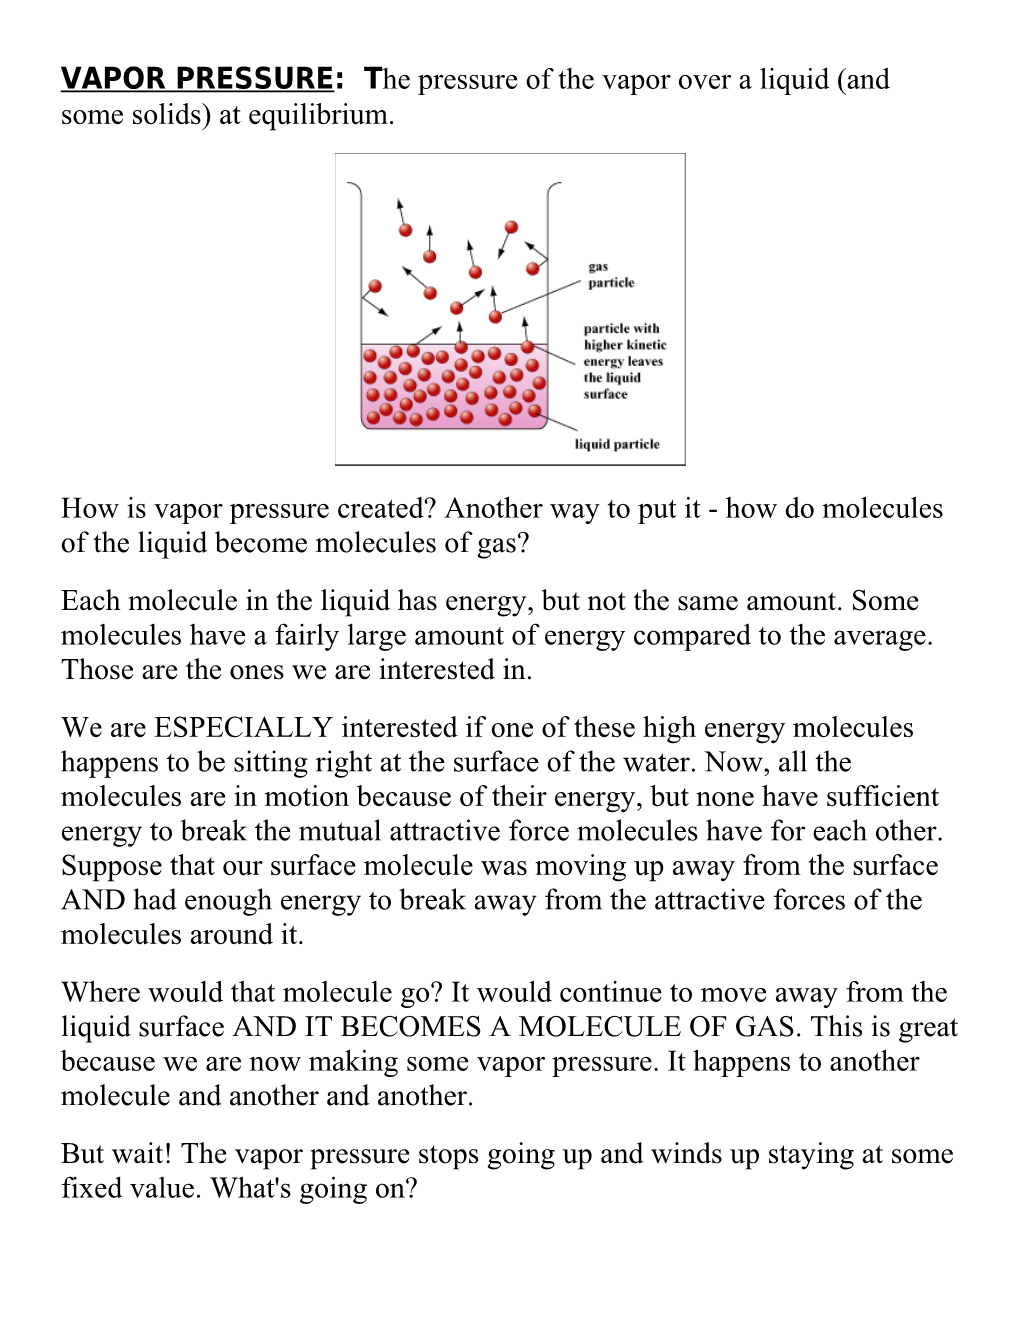 VAPOR PRESSURE: T He Pressure of the Vapor Over a Liquid (And Some Solids) at Equilibrium